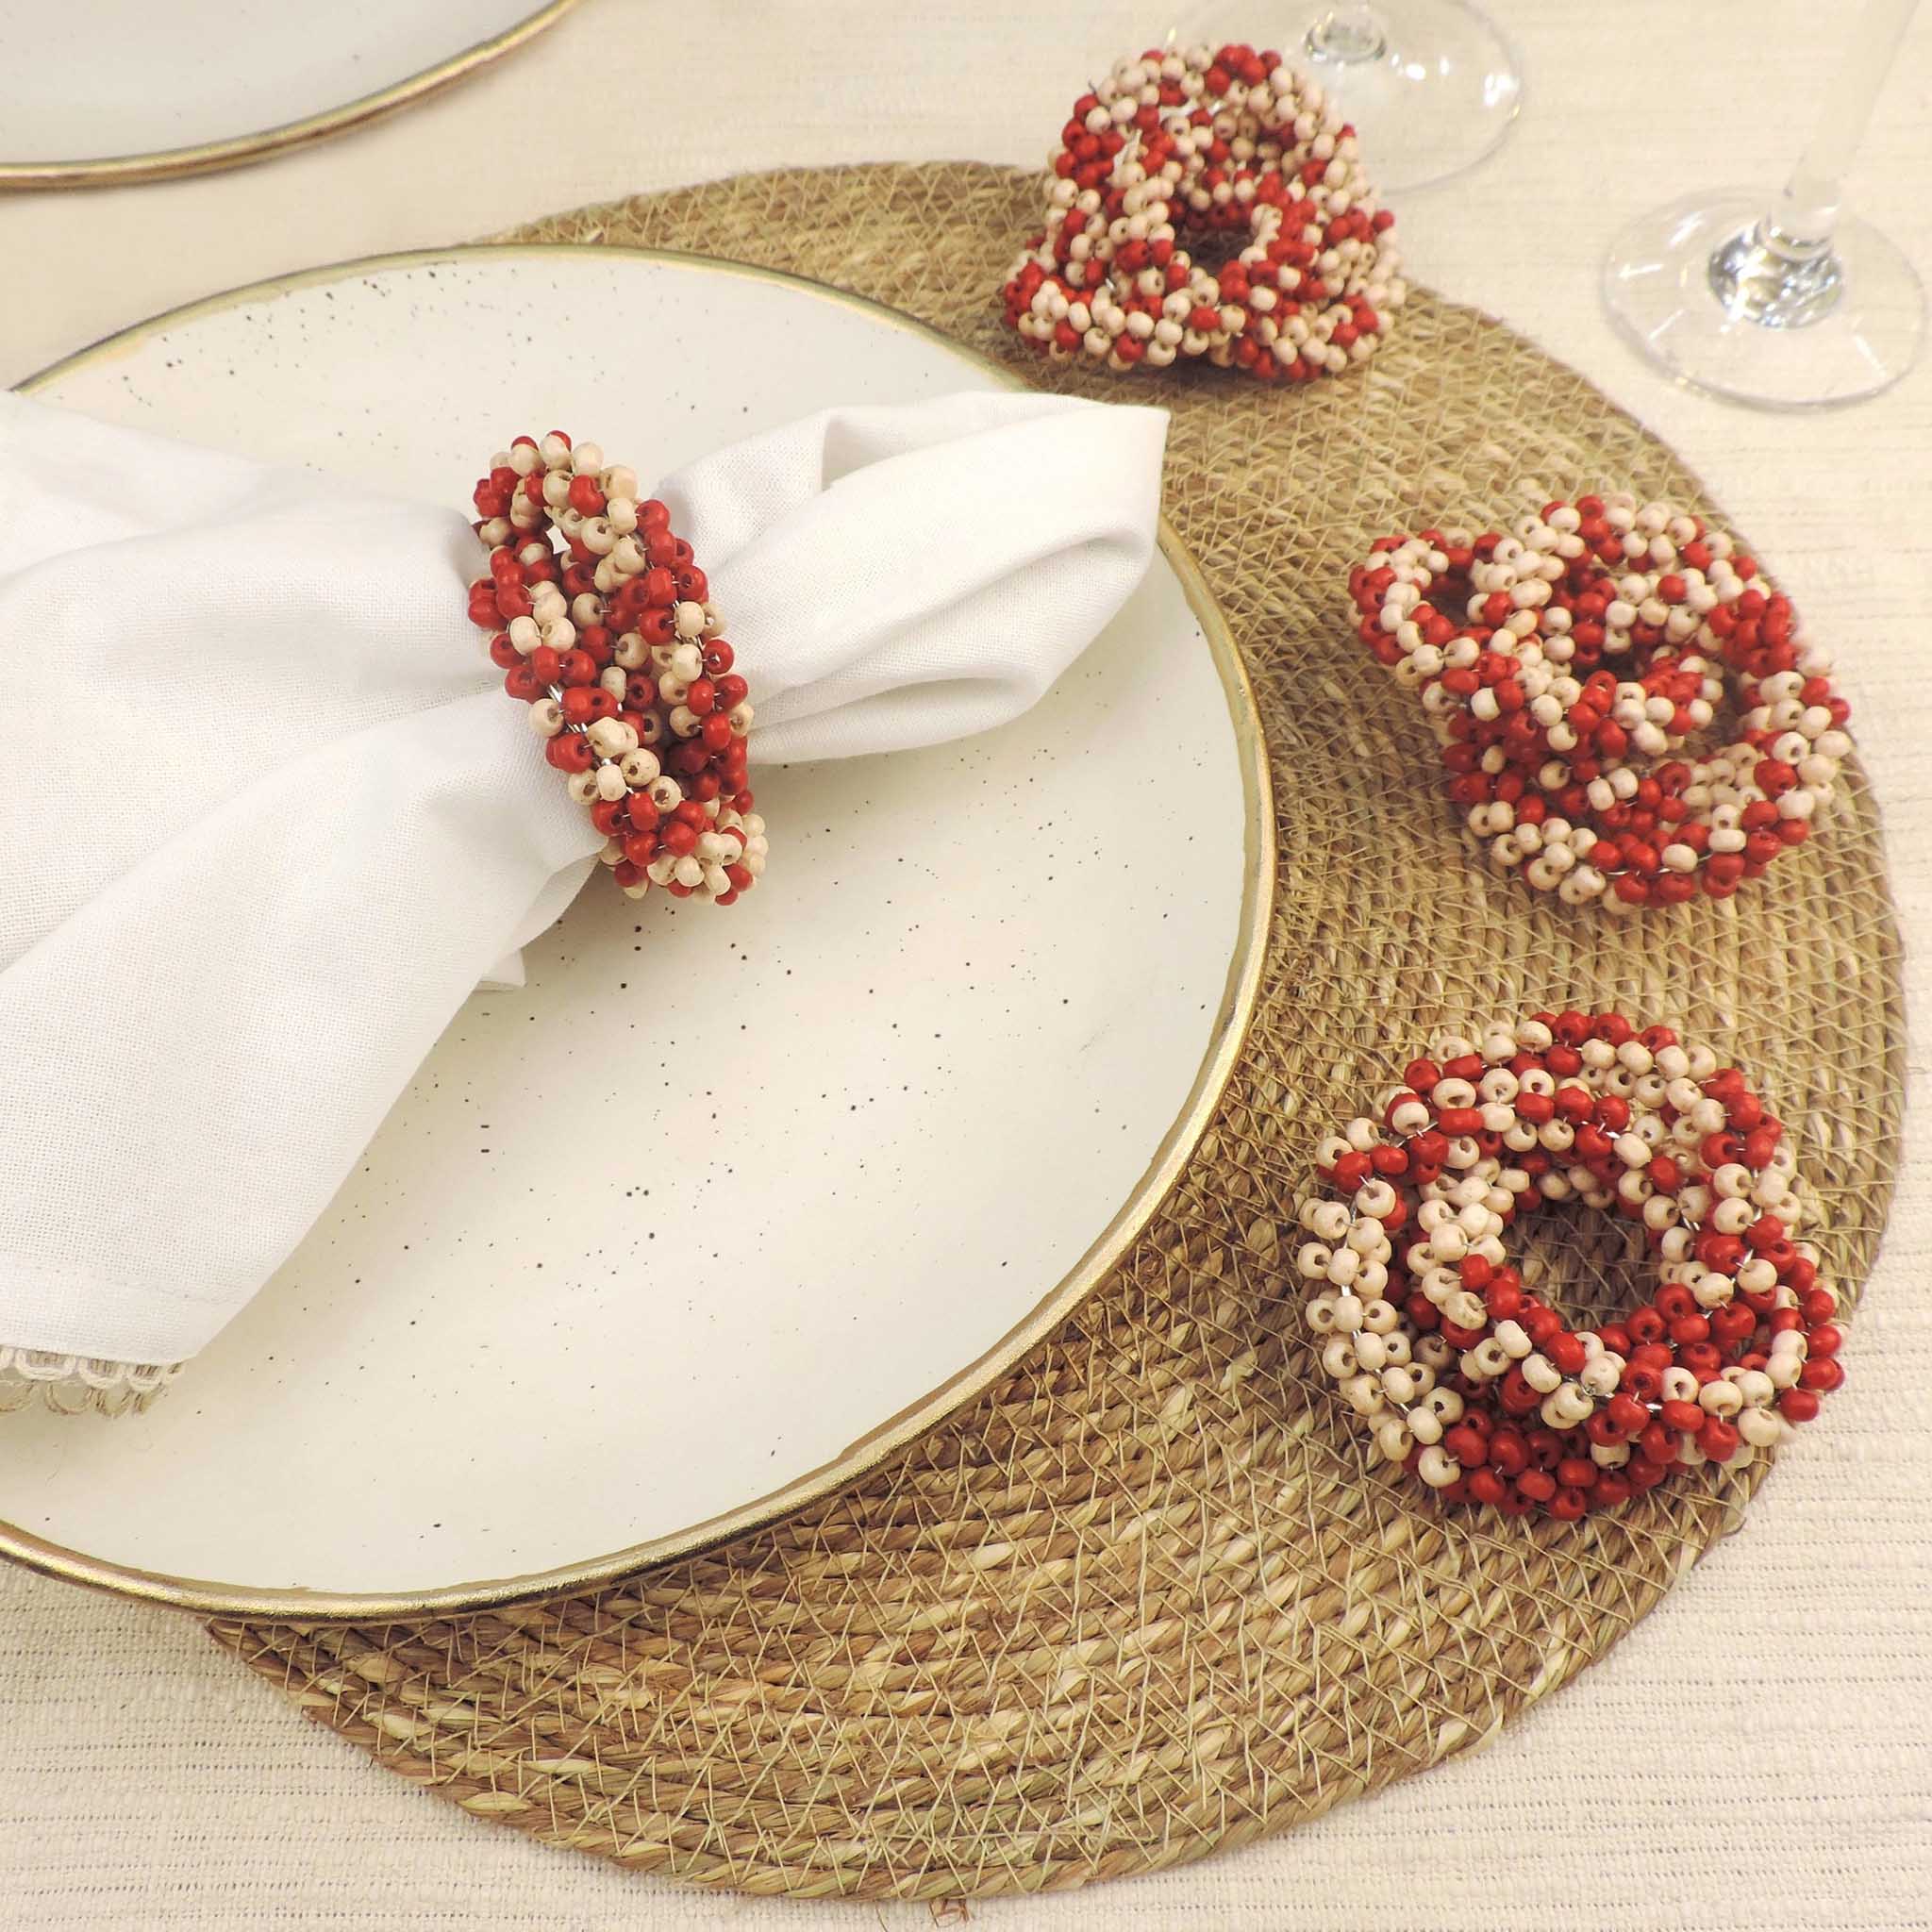 Mala Wooden Bead Napkin Ring in Coral Cream, Set of 4